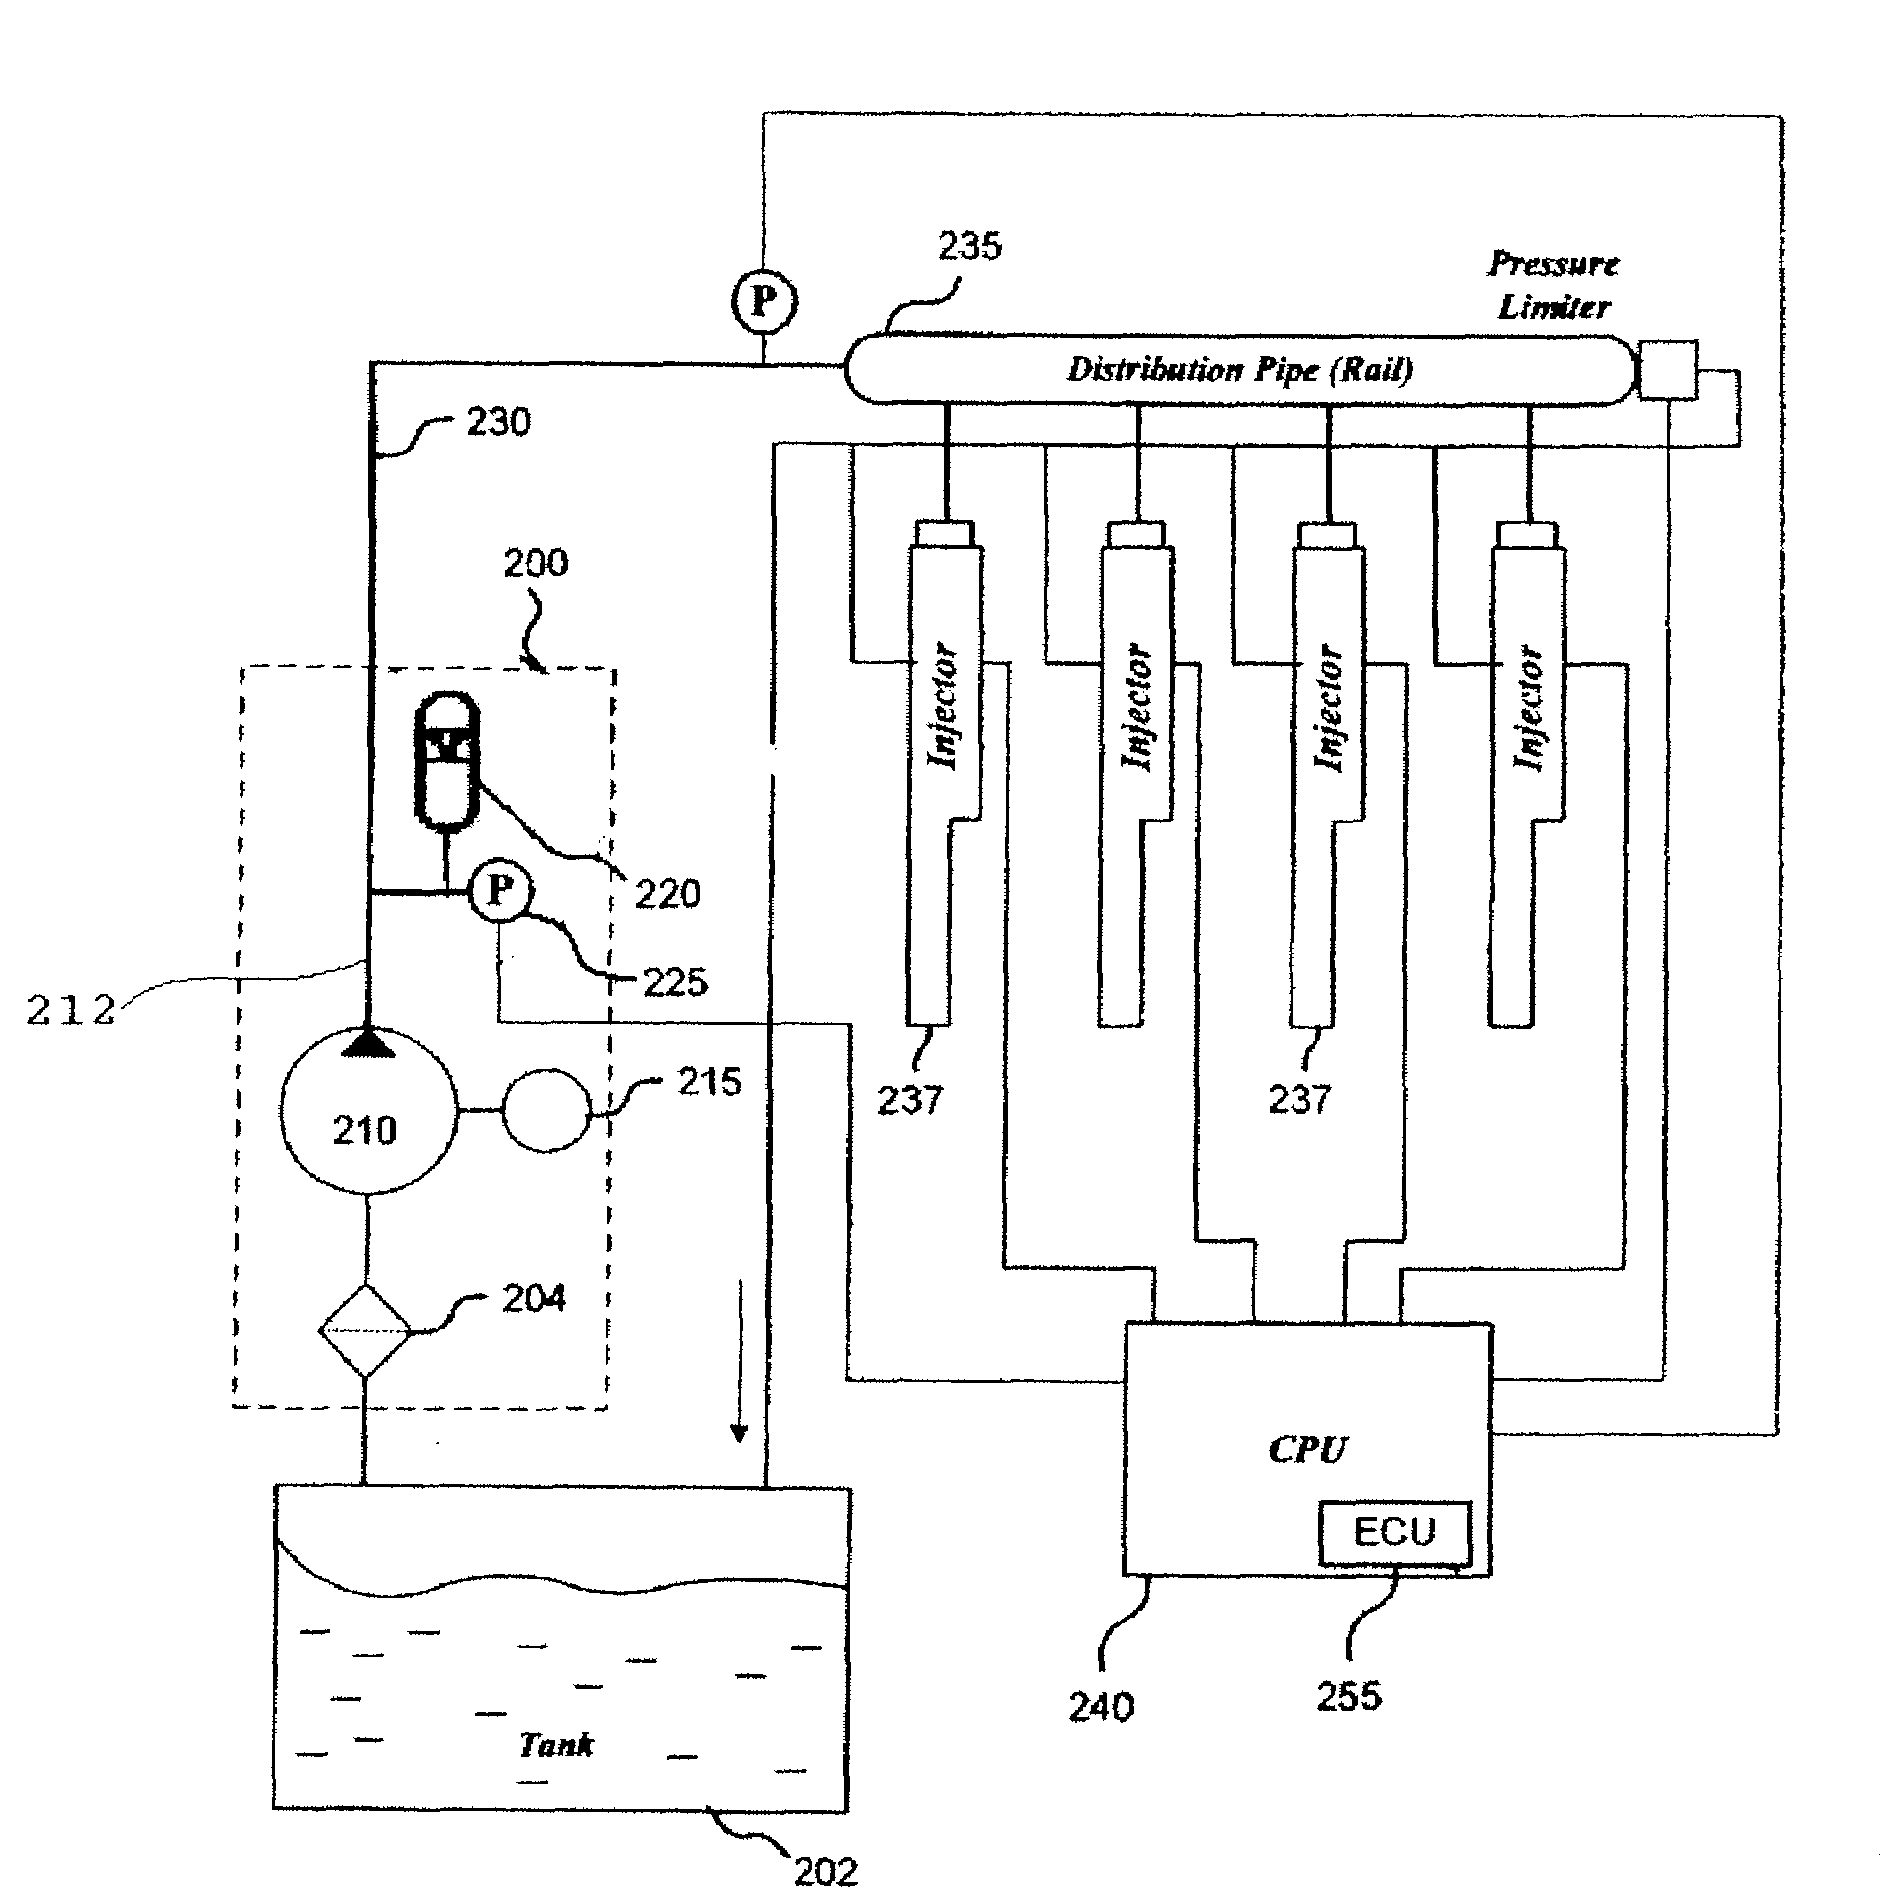 System and method for pump control